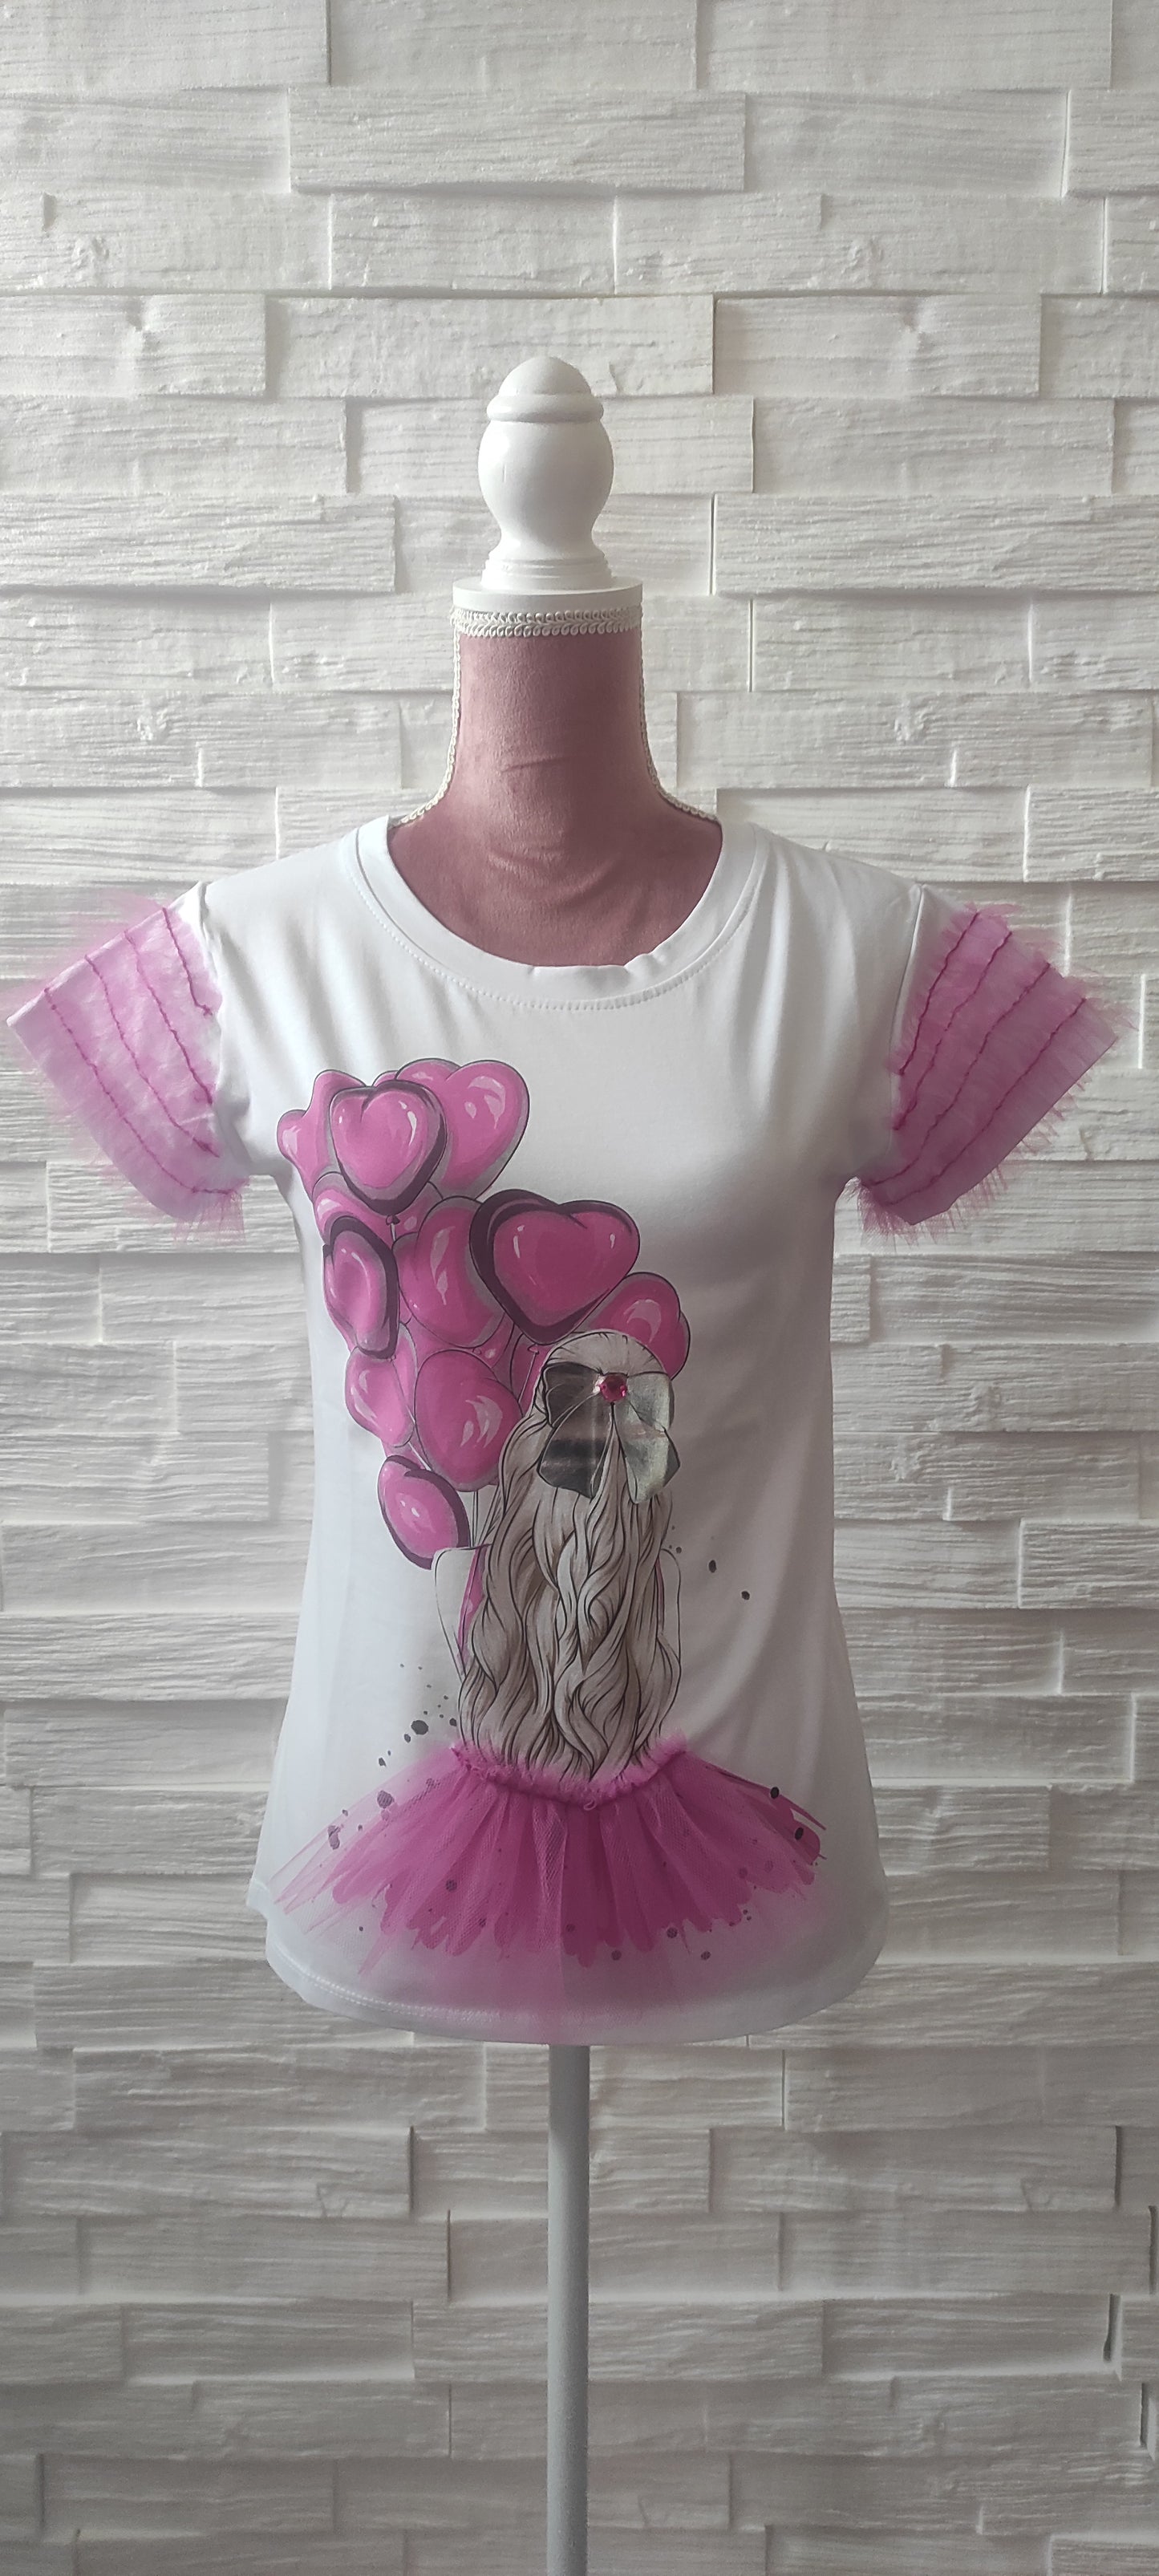 T-shirt donna in tulle